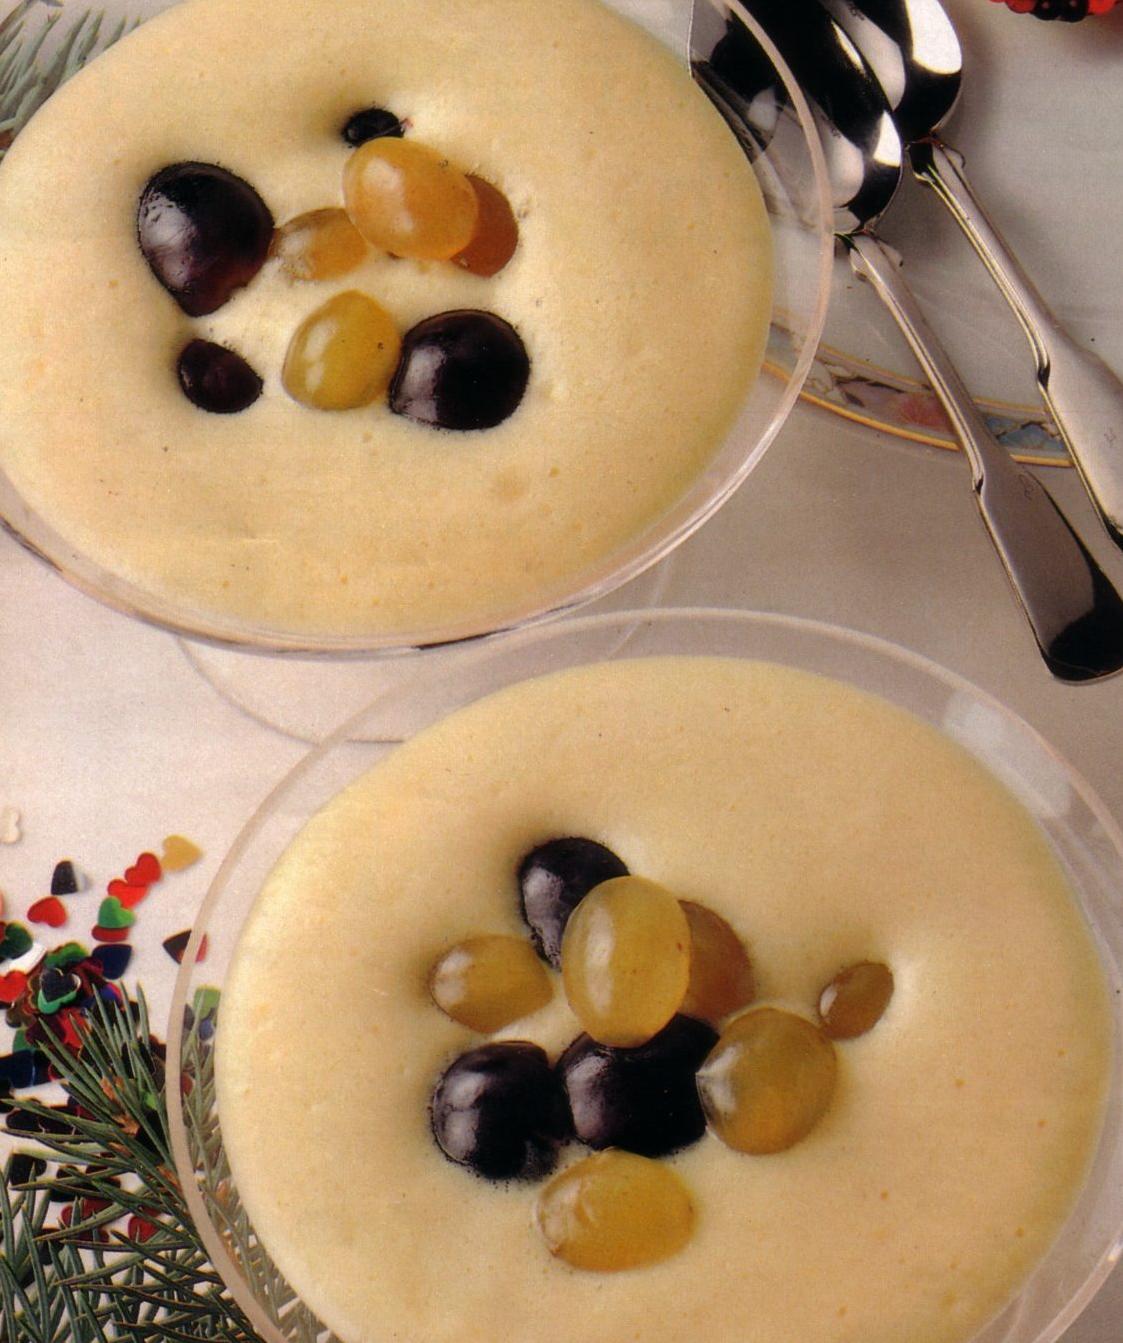  Lush, creamy goodness in every spoonful of this Wine Custard.